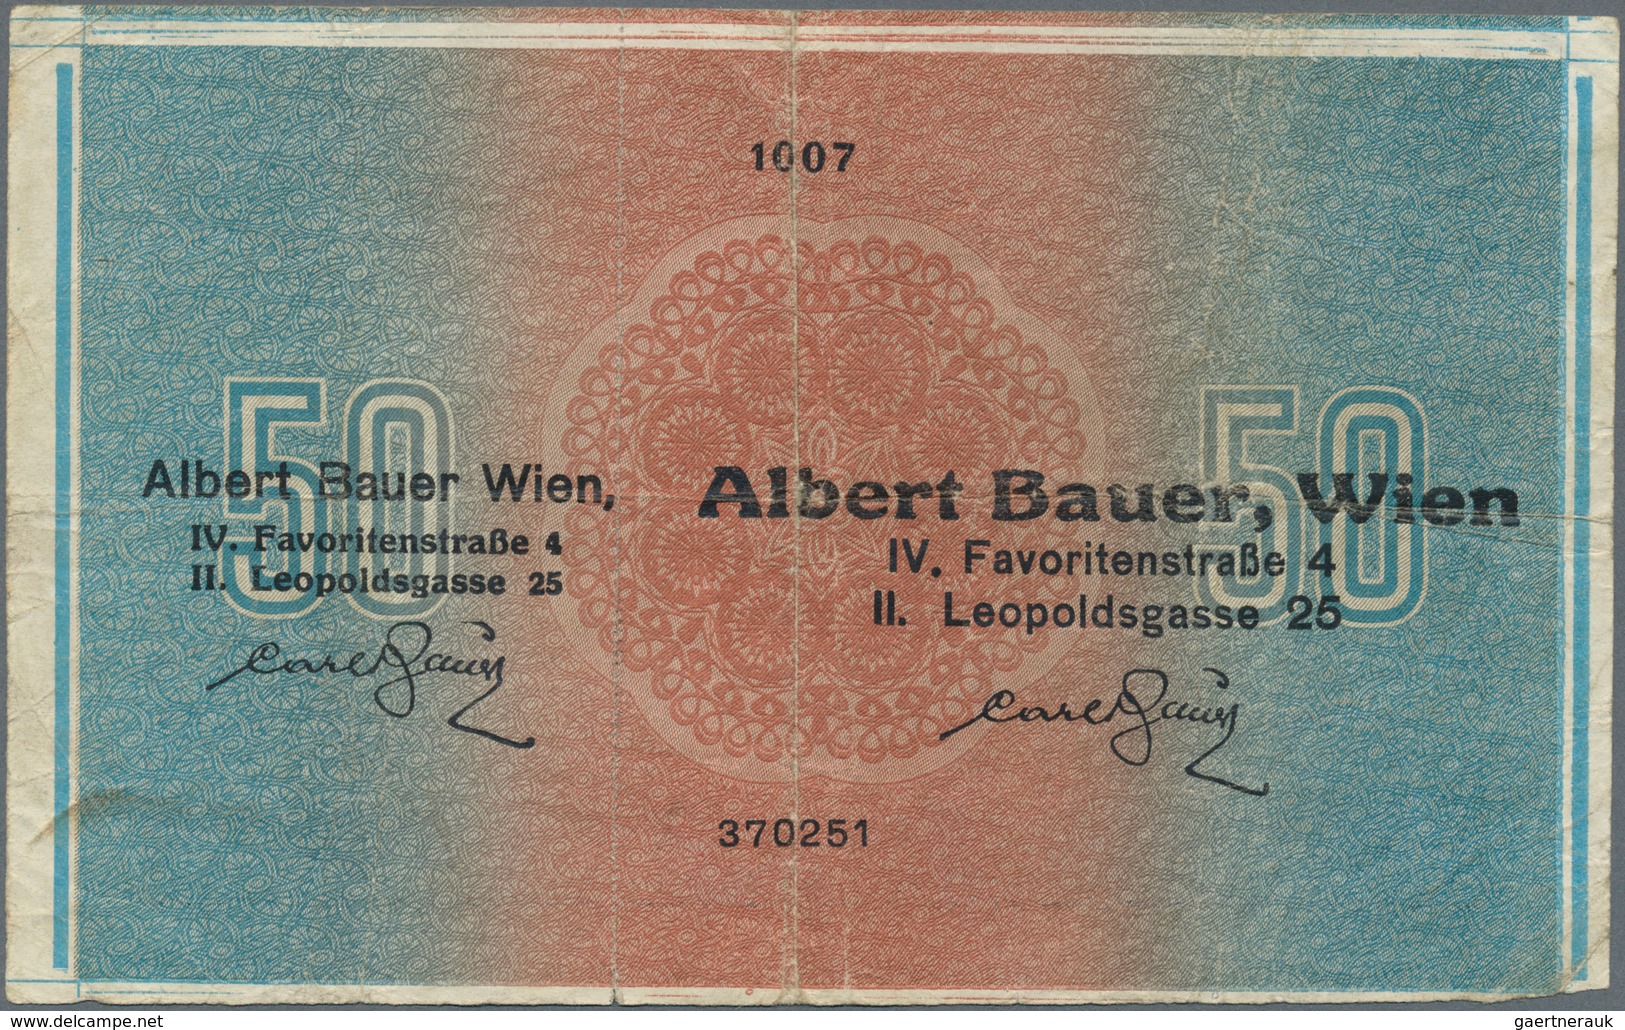 Austria / Österreich: Donaustaat Set With 3 Notes With Lottery Overprint On 50 Schilling 1923 P. S15 - Autriche